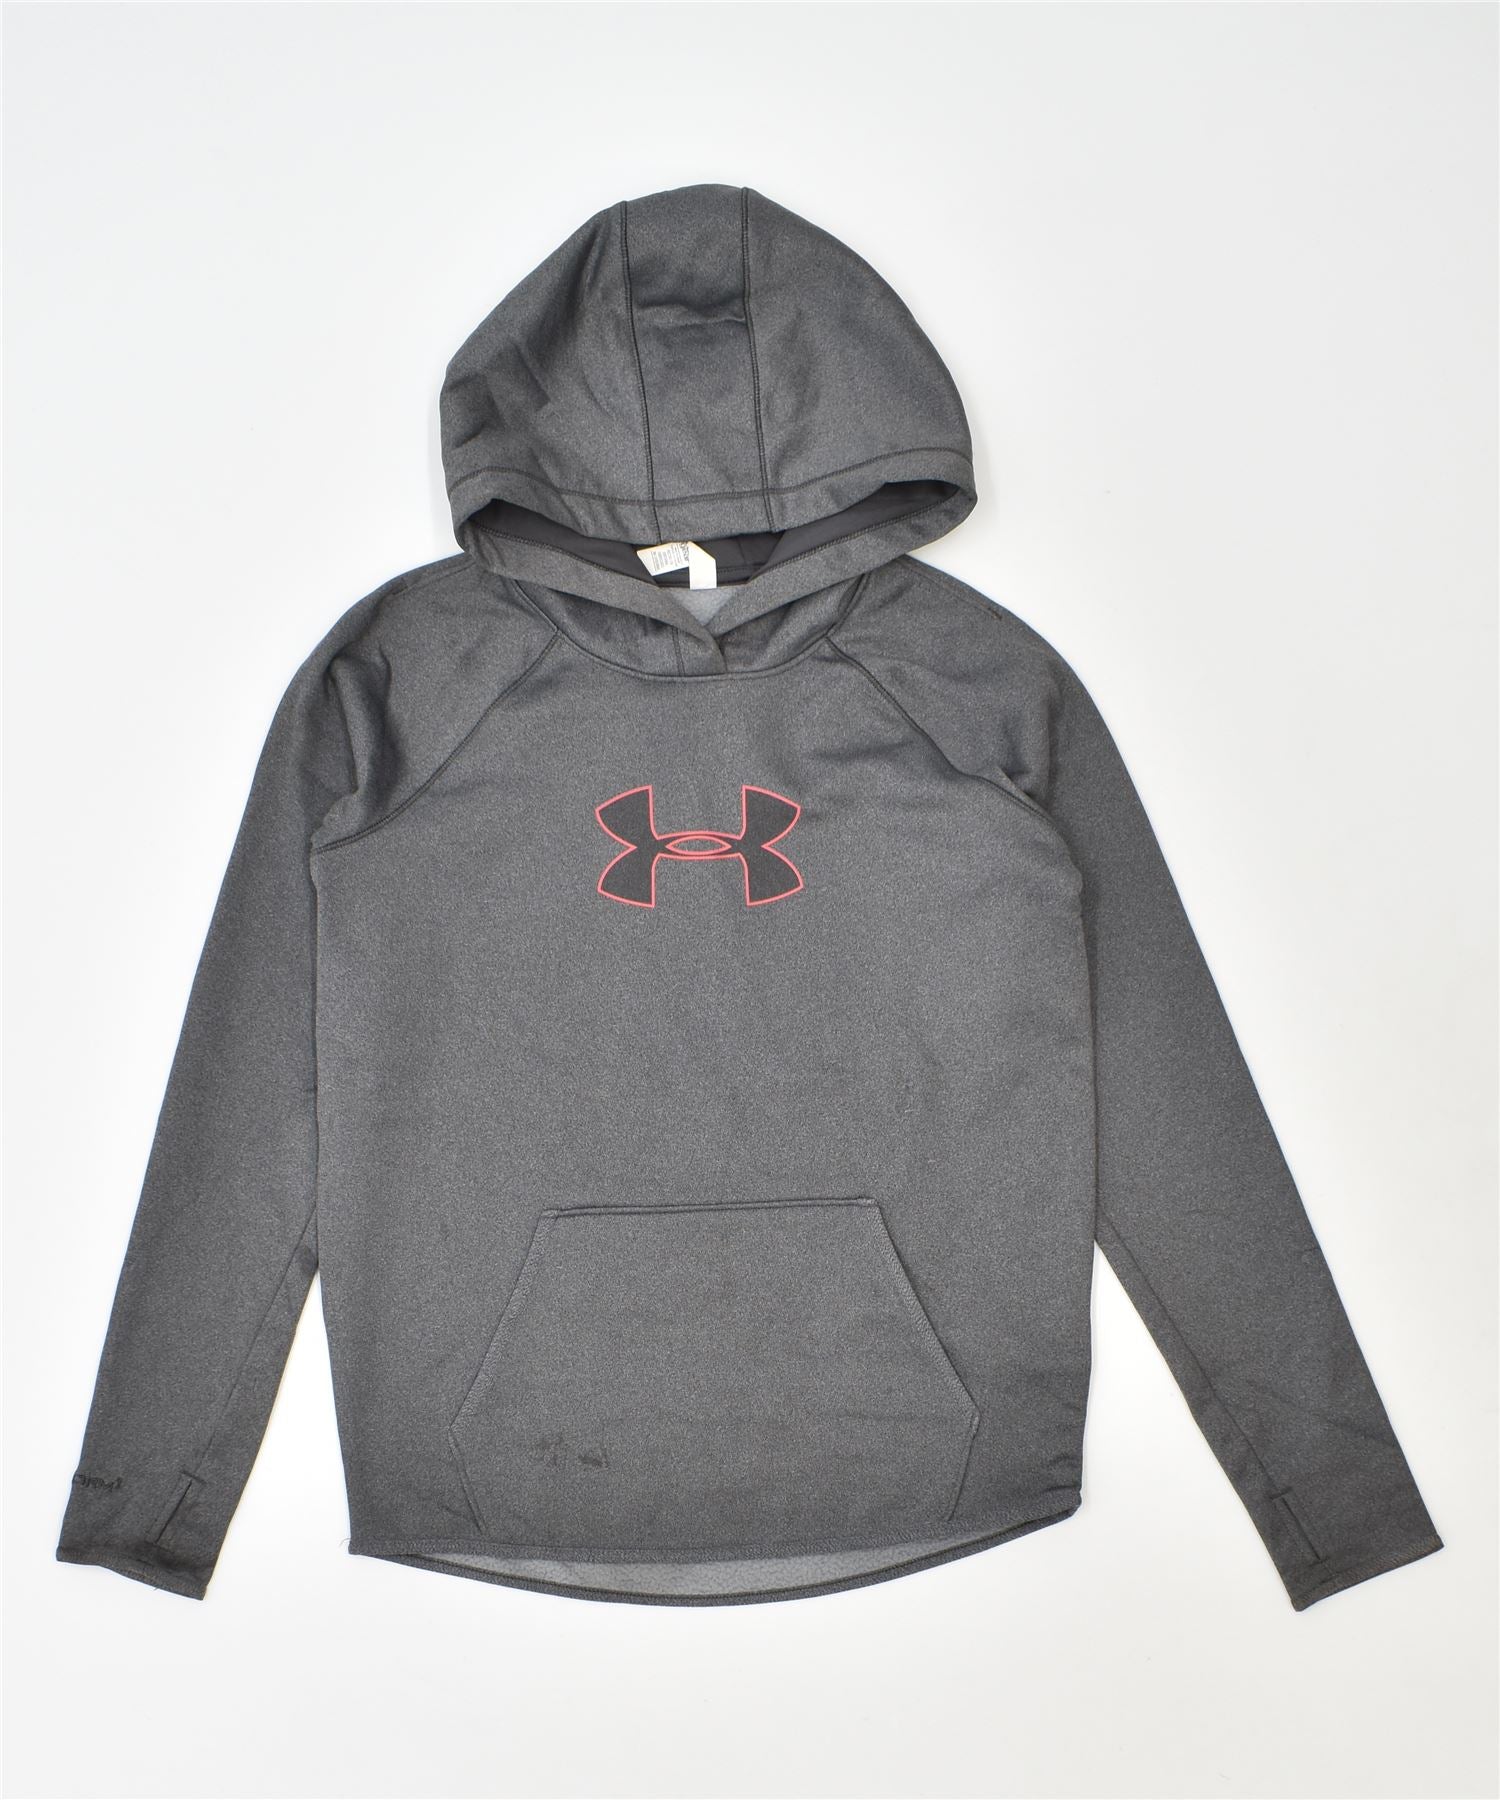 UNDER ARMOUR Womens Loose Fit Hoodie Jumper UK 6 XS Grey Polyester, Vintage & Second-Hand Clothing Online